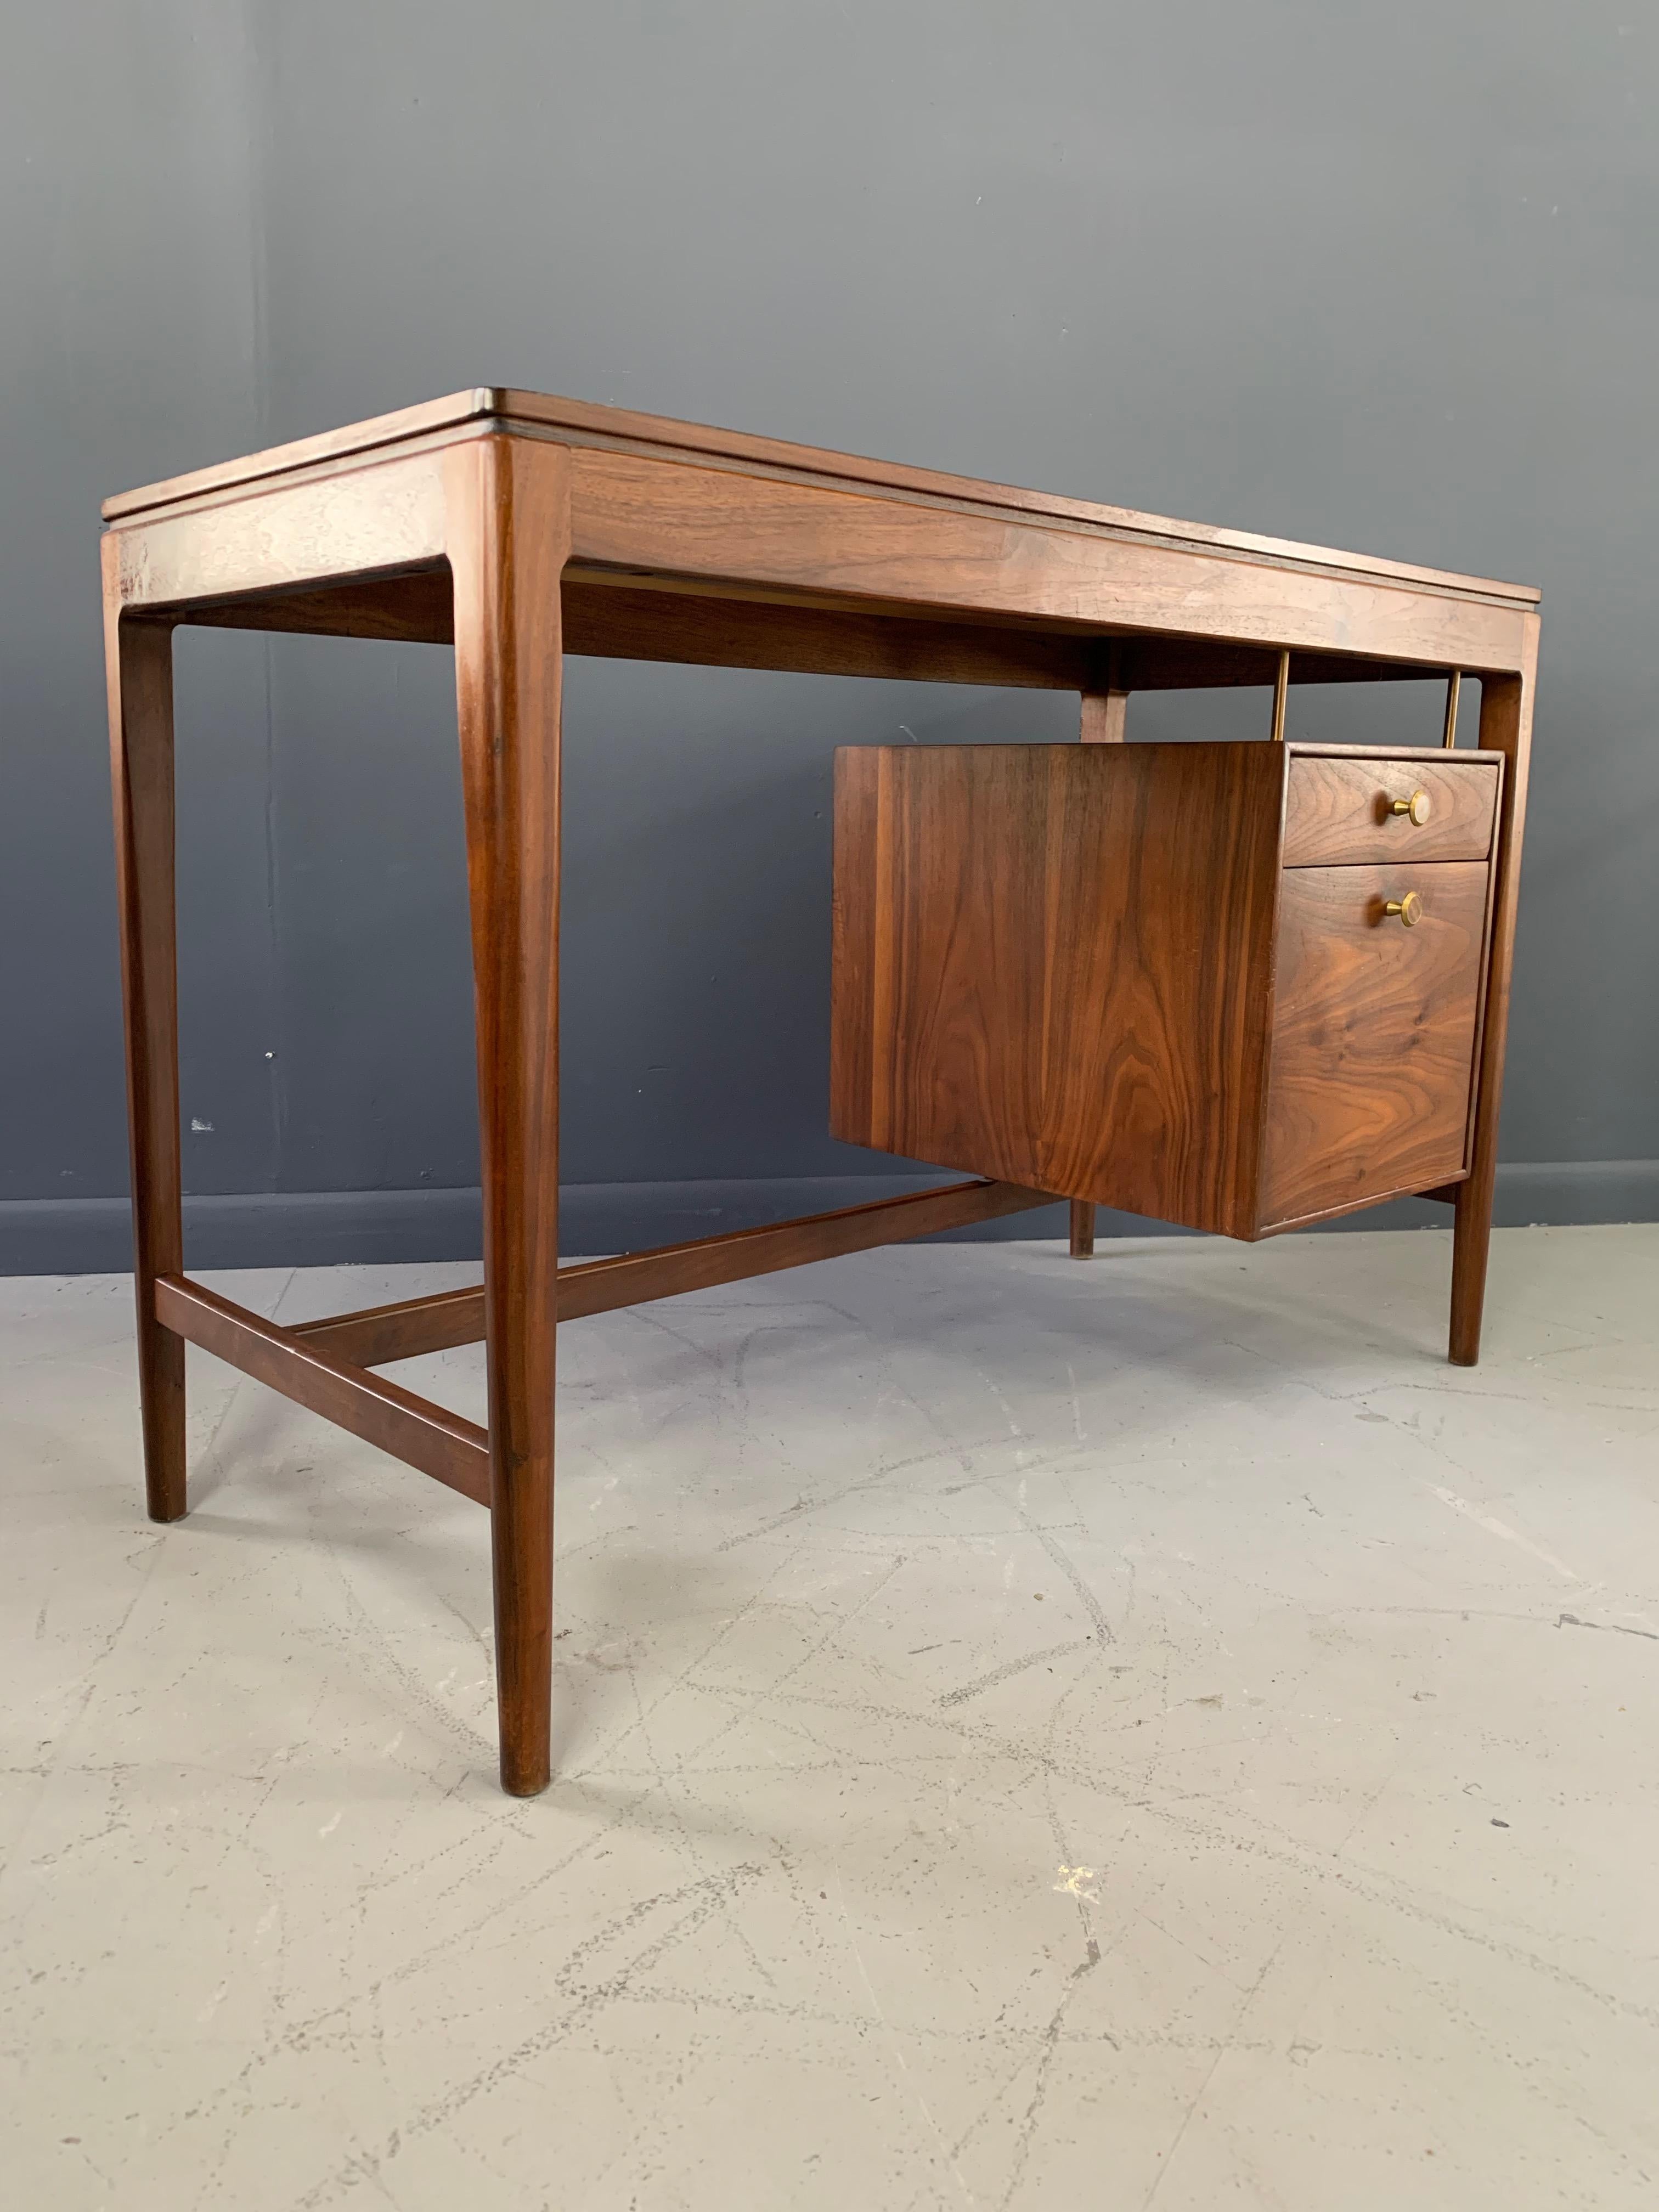 This walnut desk was designed by Stewart MacDougall and Kipp Stewart as part of the 